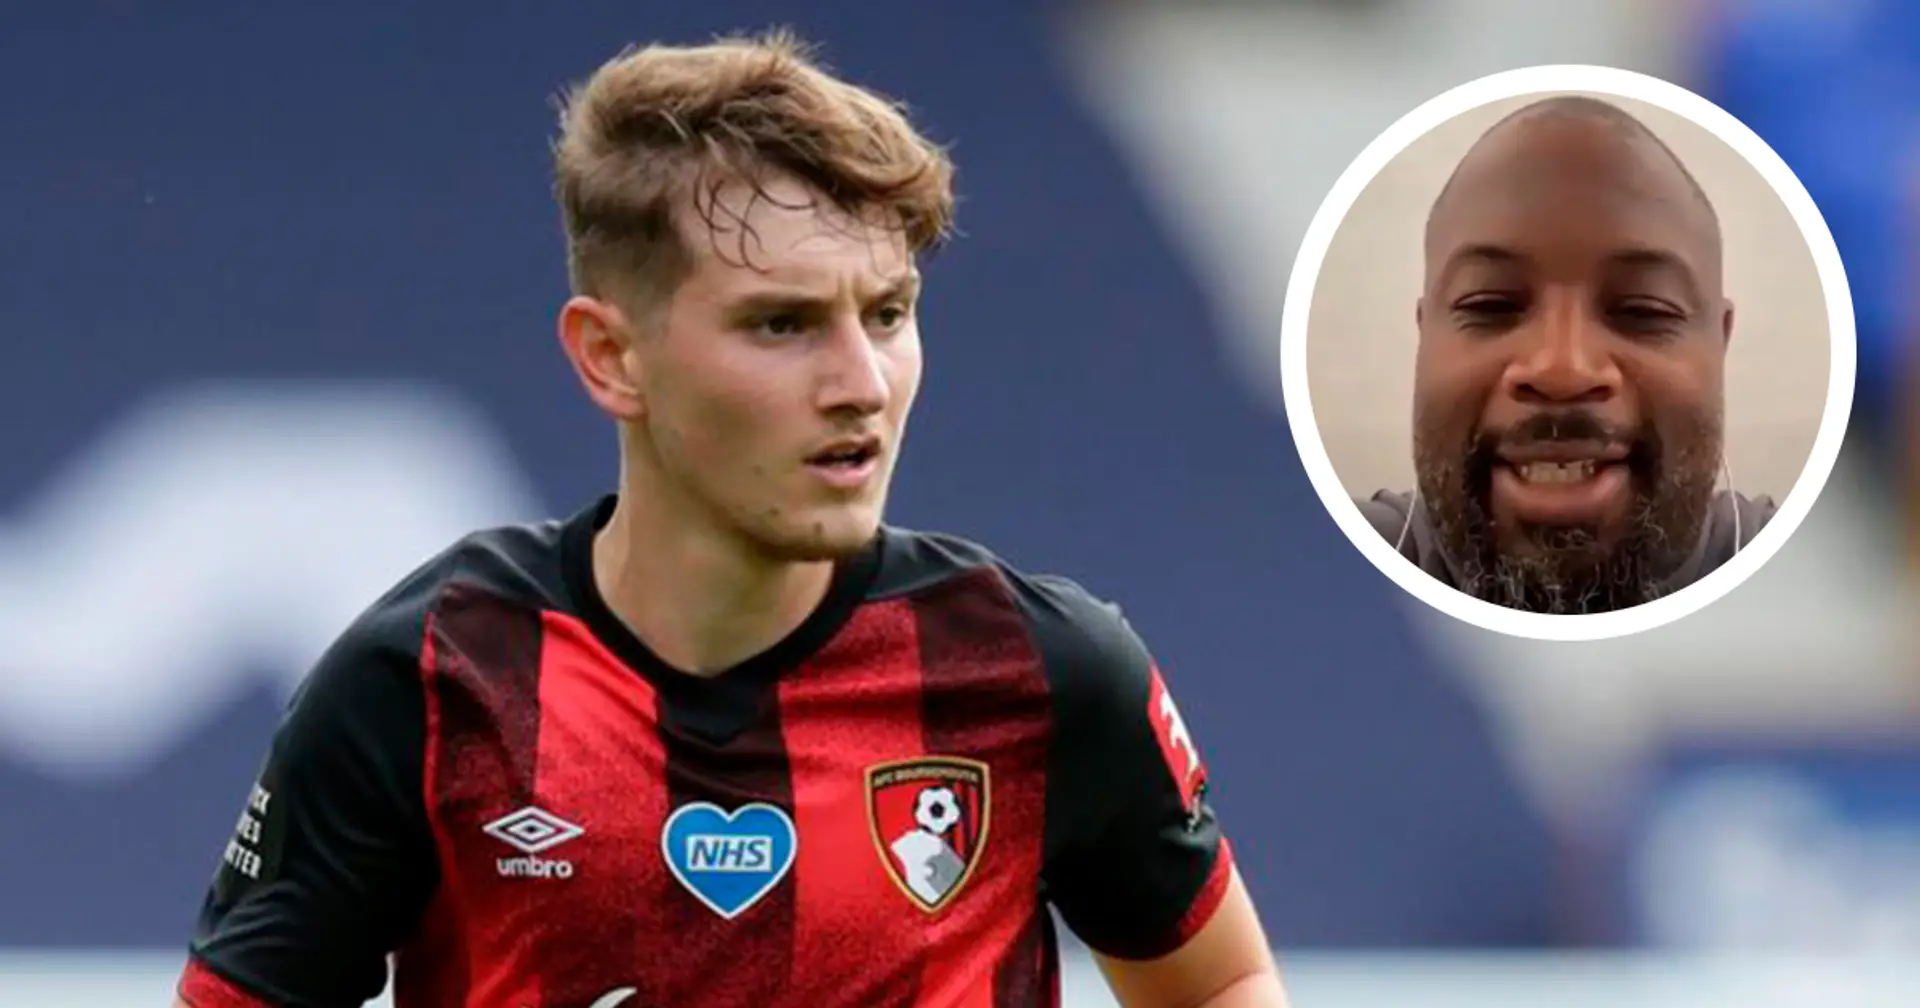 'Brooks is like Giggs': Ex-Wales international Nathan Blake backs rumoured United target to succeed at Old Trafford